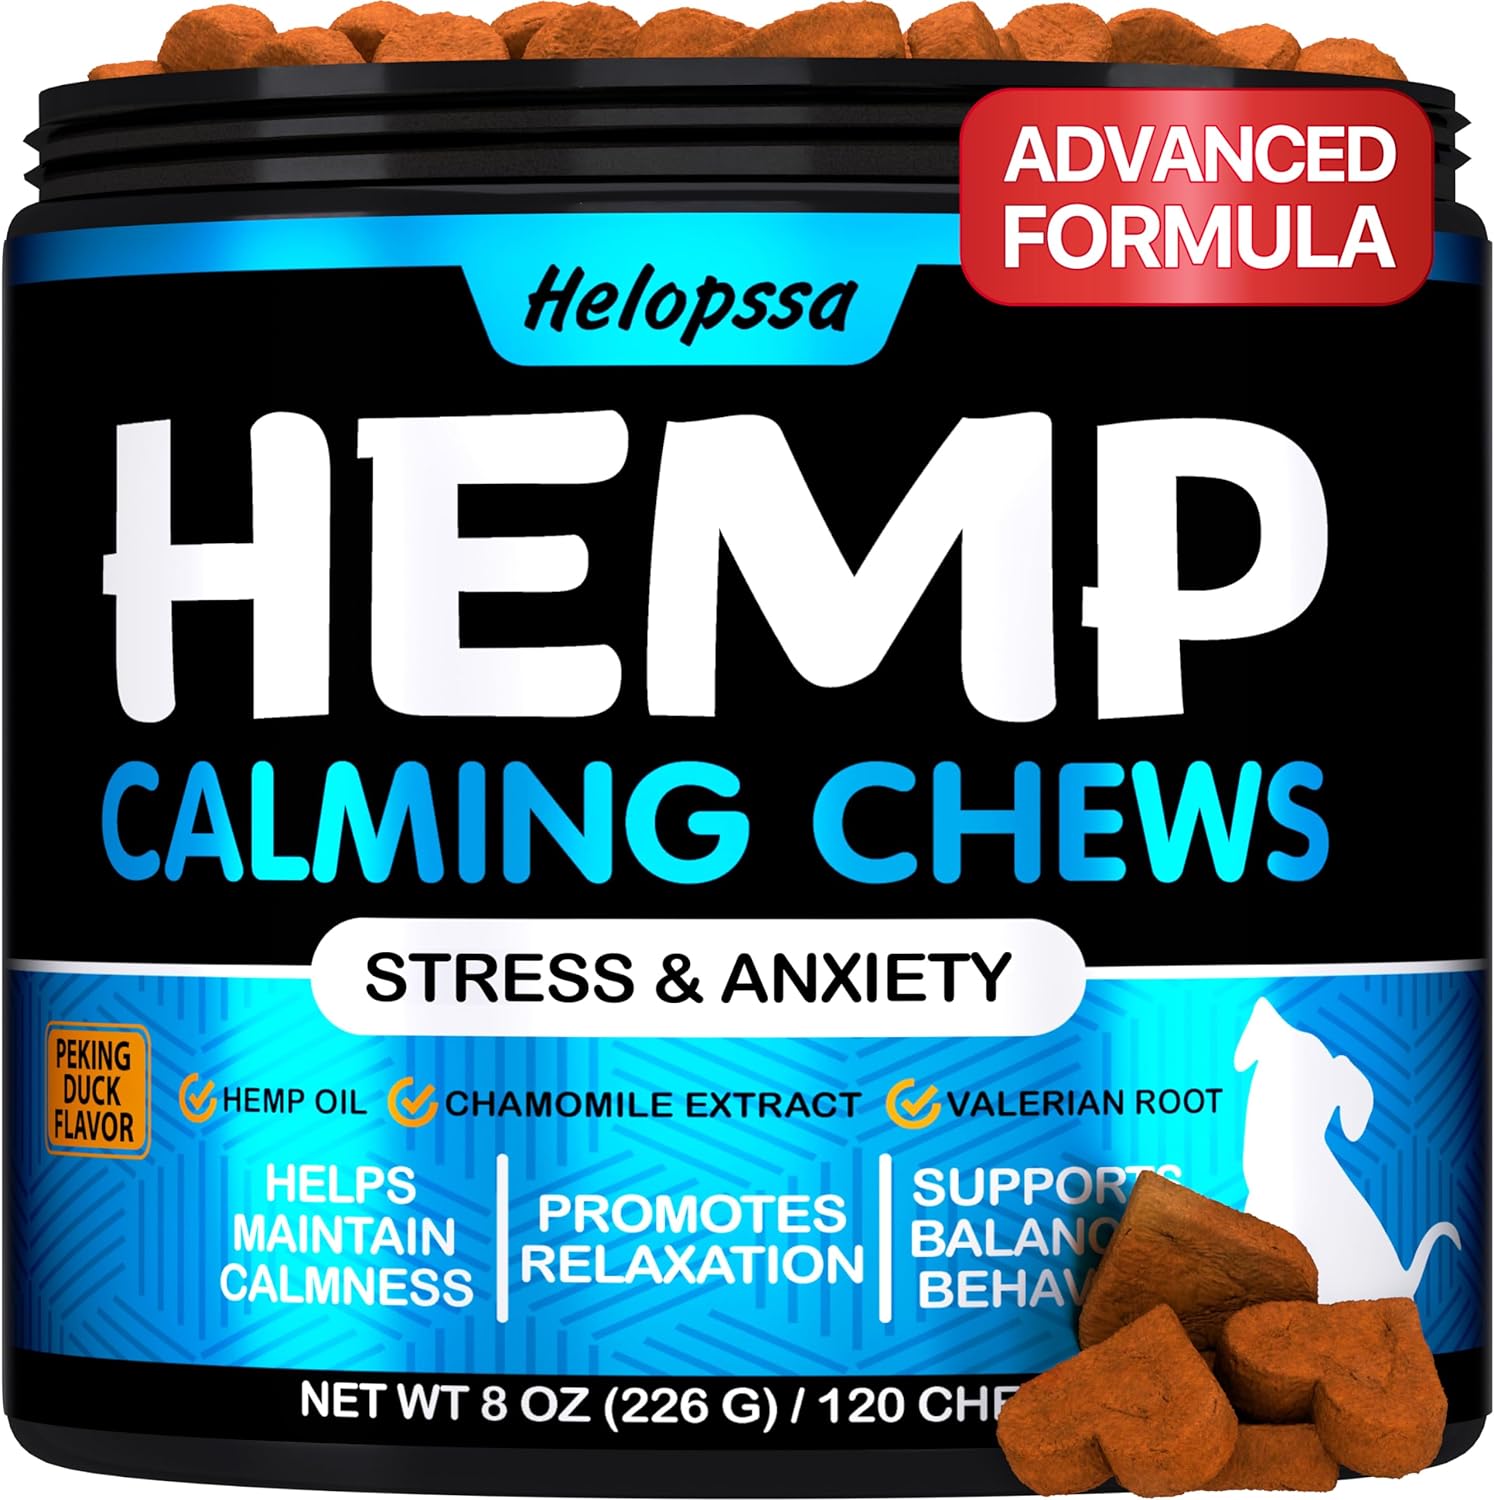 Hemp Calming Chews for Dogs with Anxiety and Stress - Dog Calming Treats - Dog Anxiety Relief - Storms, Barking, Separation - Valerian - Hemp Oil - Calming Treats for Dogs - Made in USA - 120 Chews